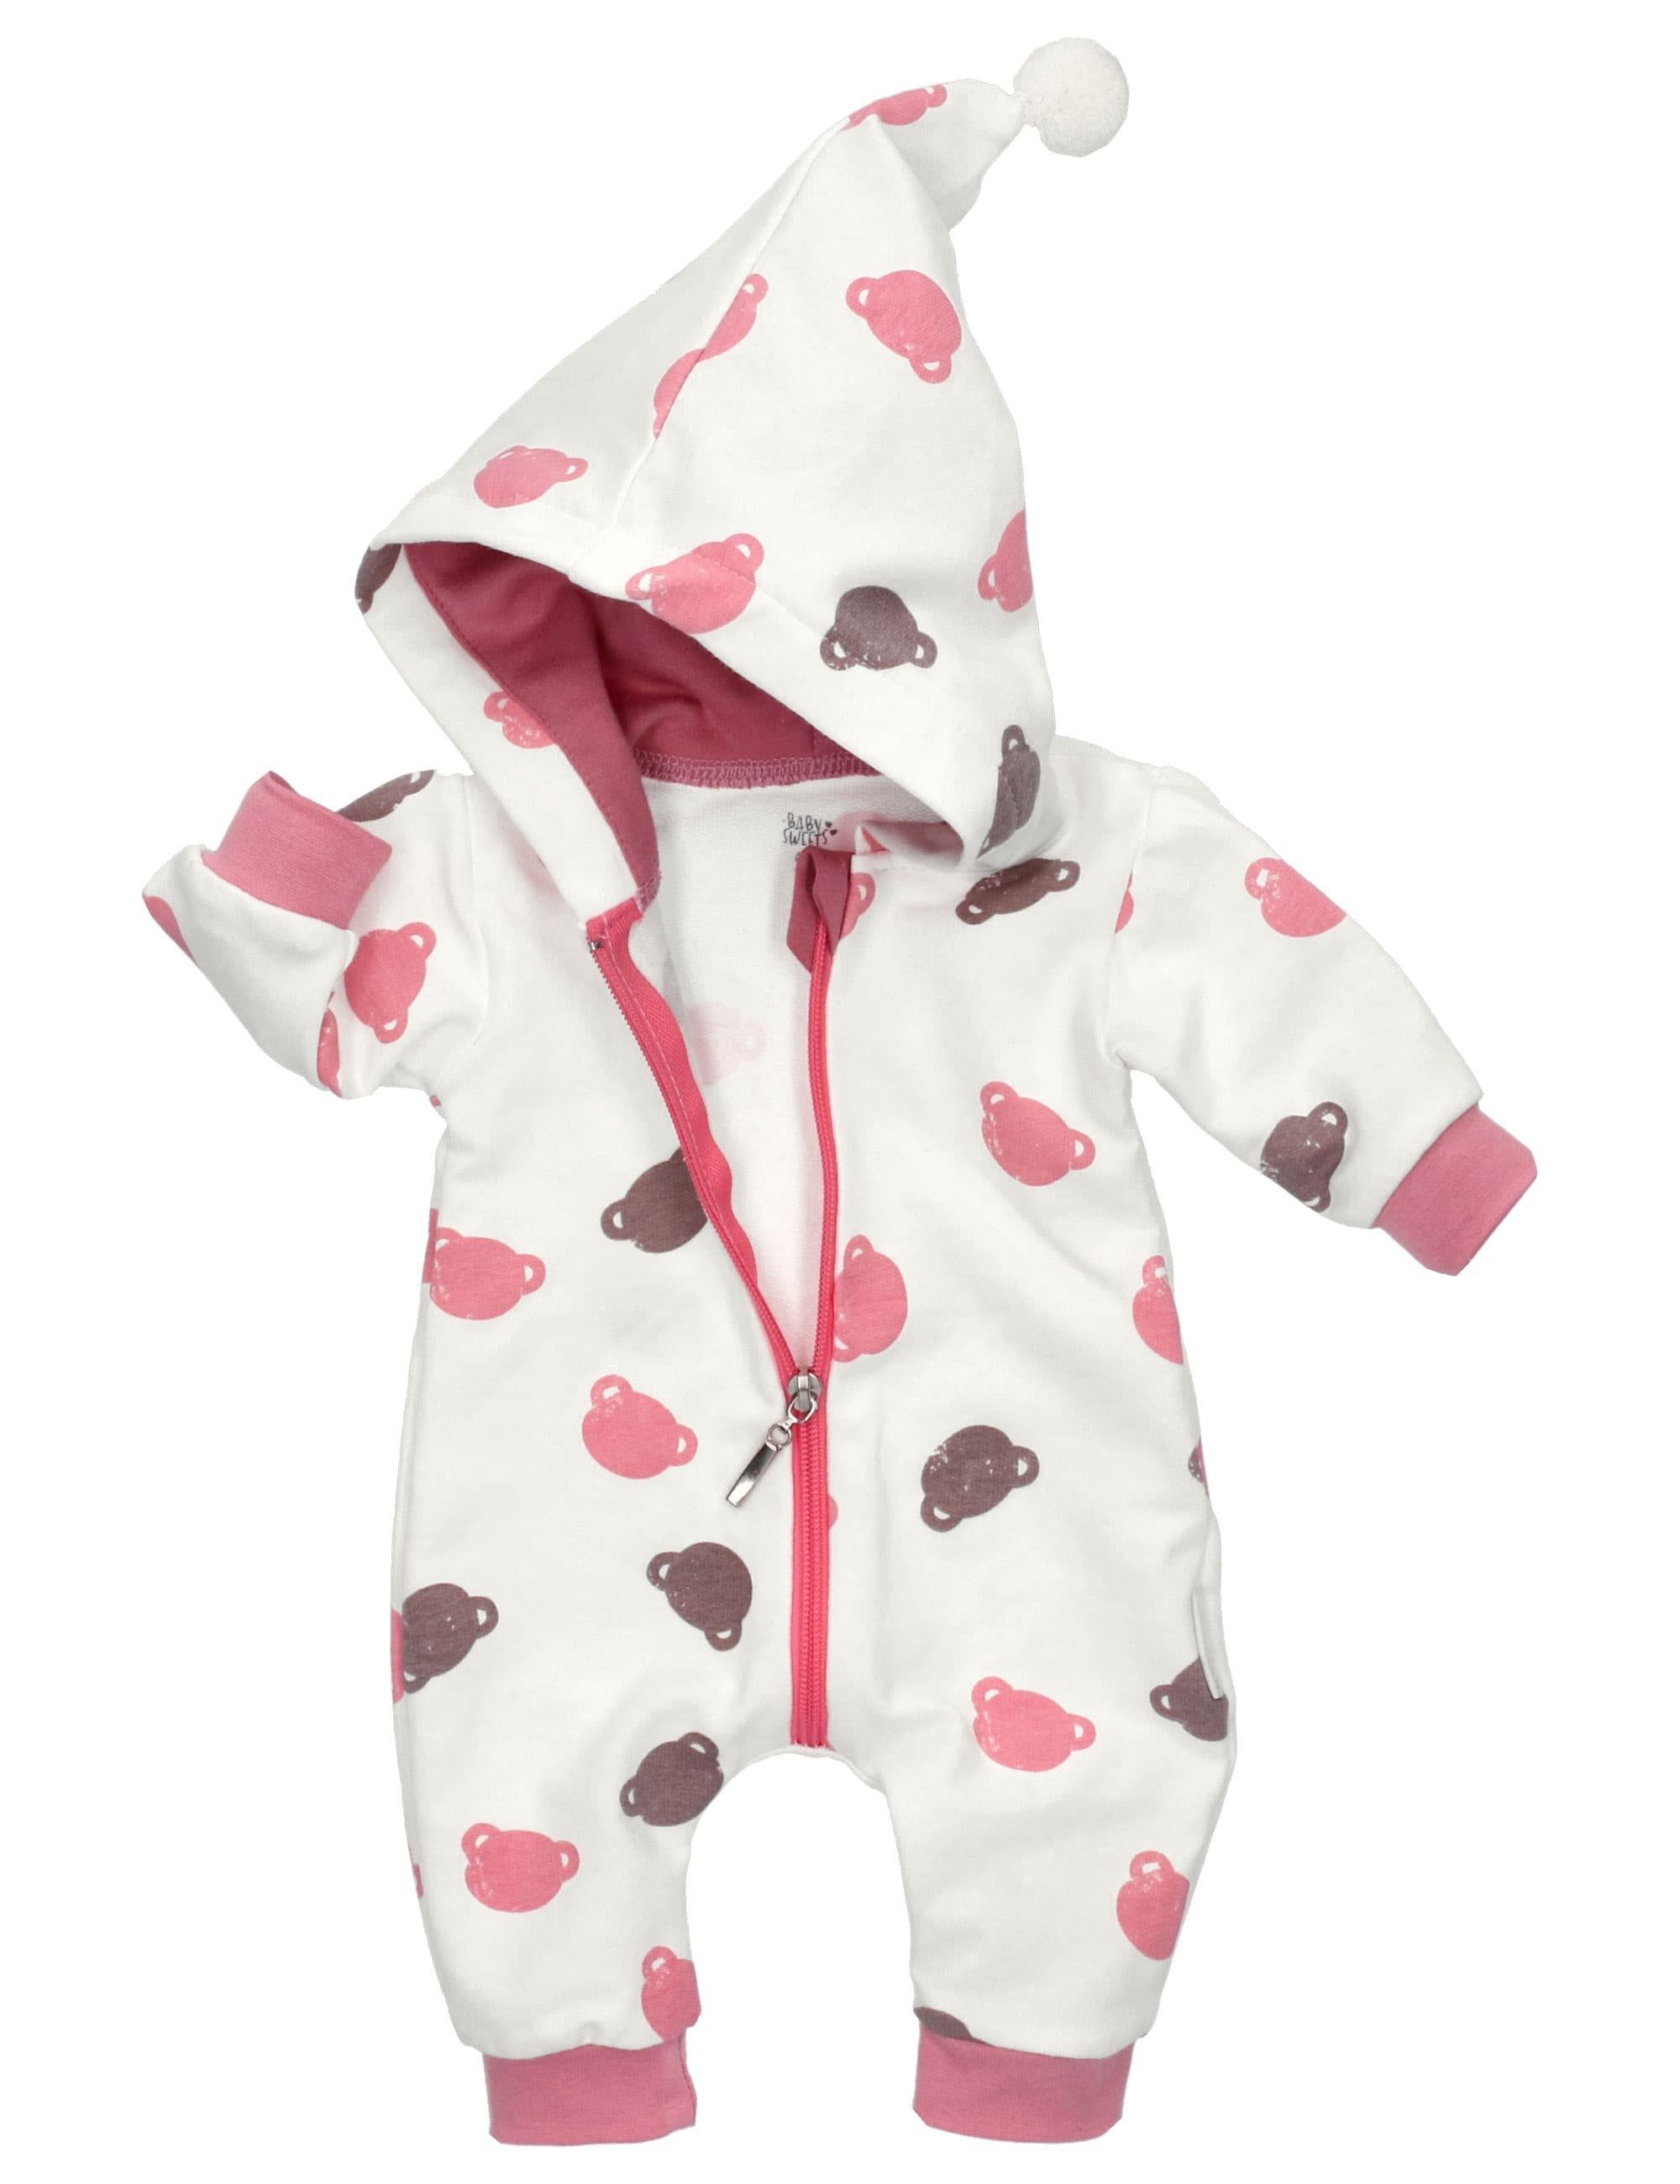 Baby Sweets (1-tlg) weiß Overall Strampler, Koala Overall rosa